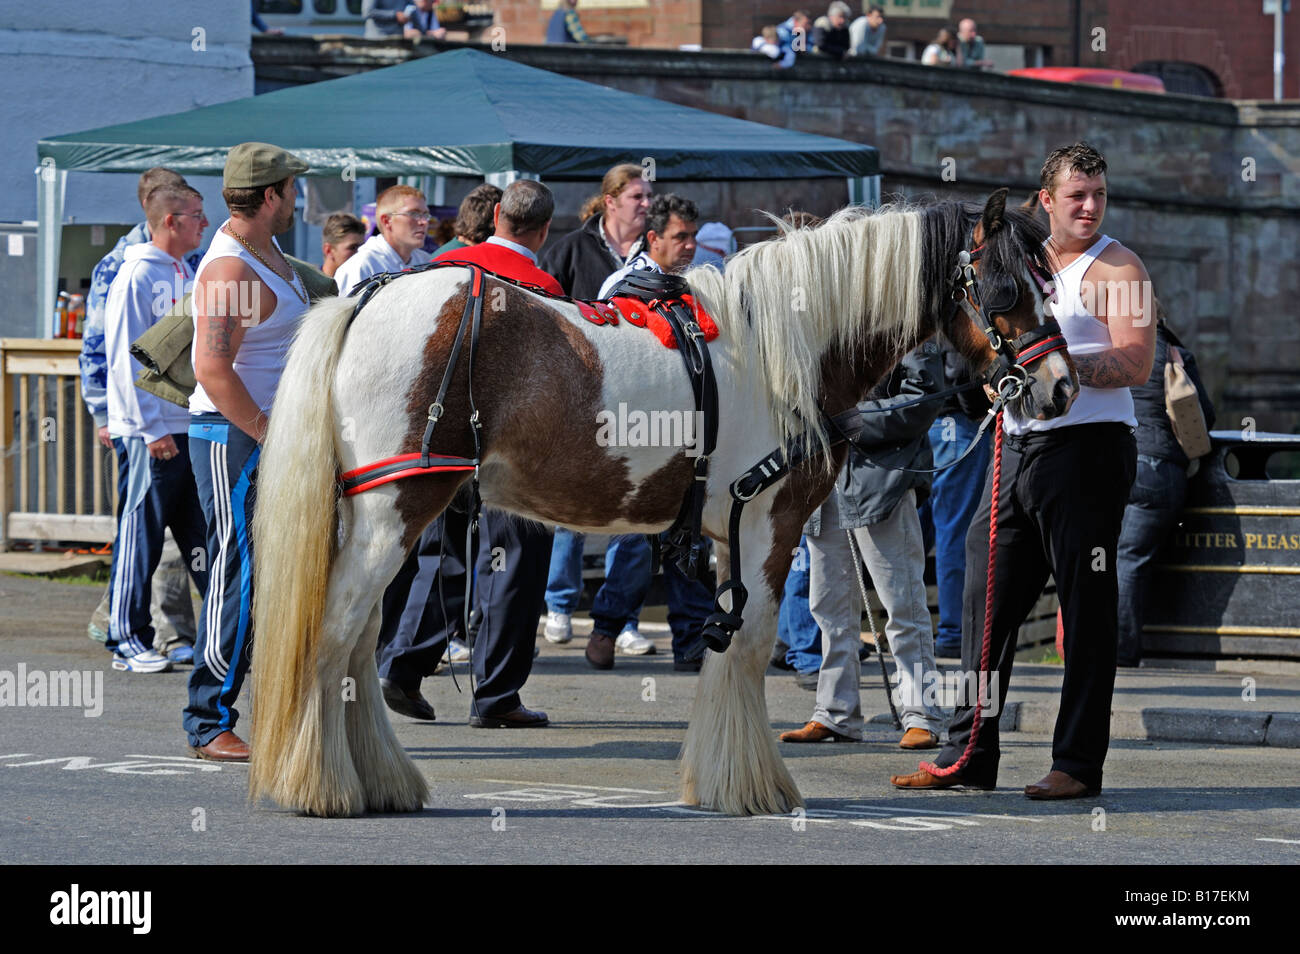 Gypsy traveller horse dealers and spectators at Appleby Horse Fair. Appleby-in-Westmorland, Cumbria, England, United Kingdom. Stock Photo